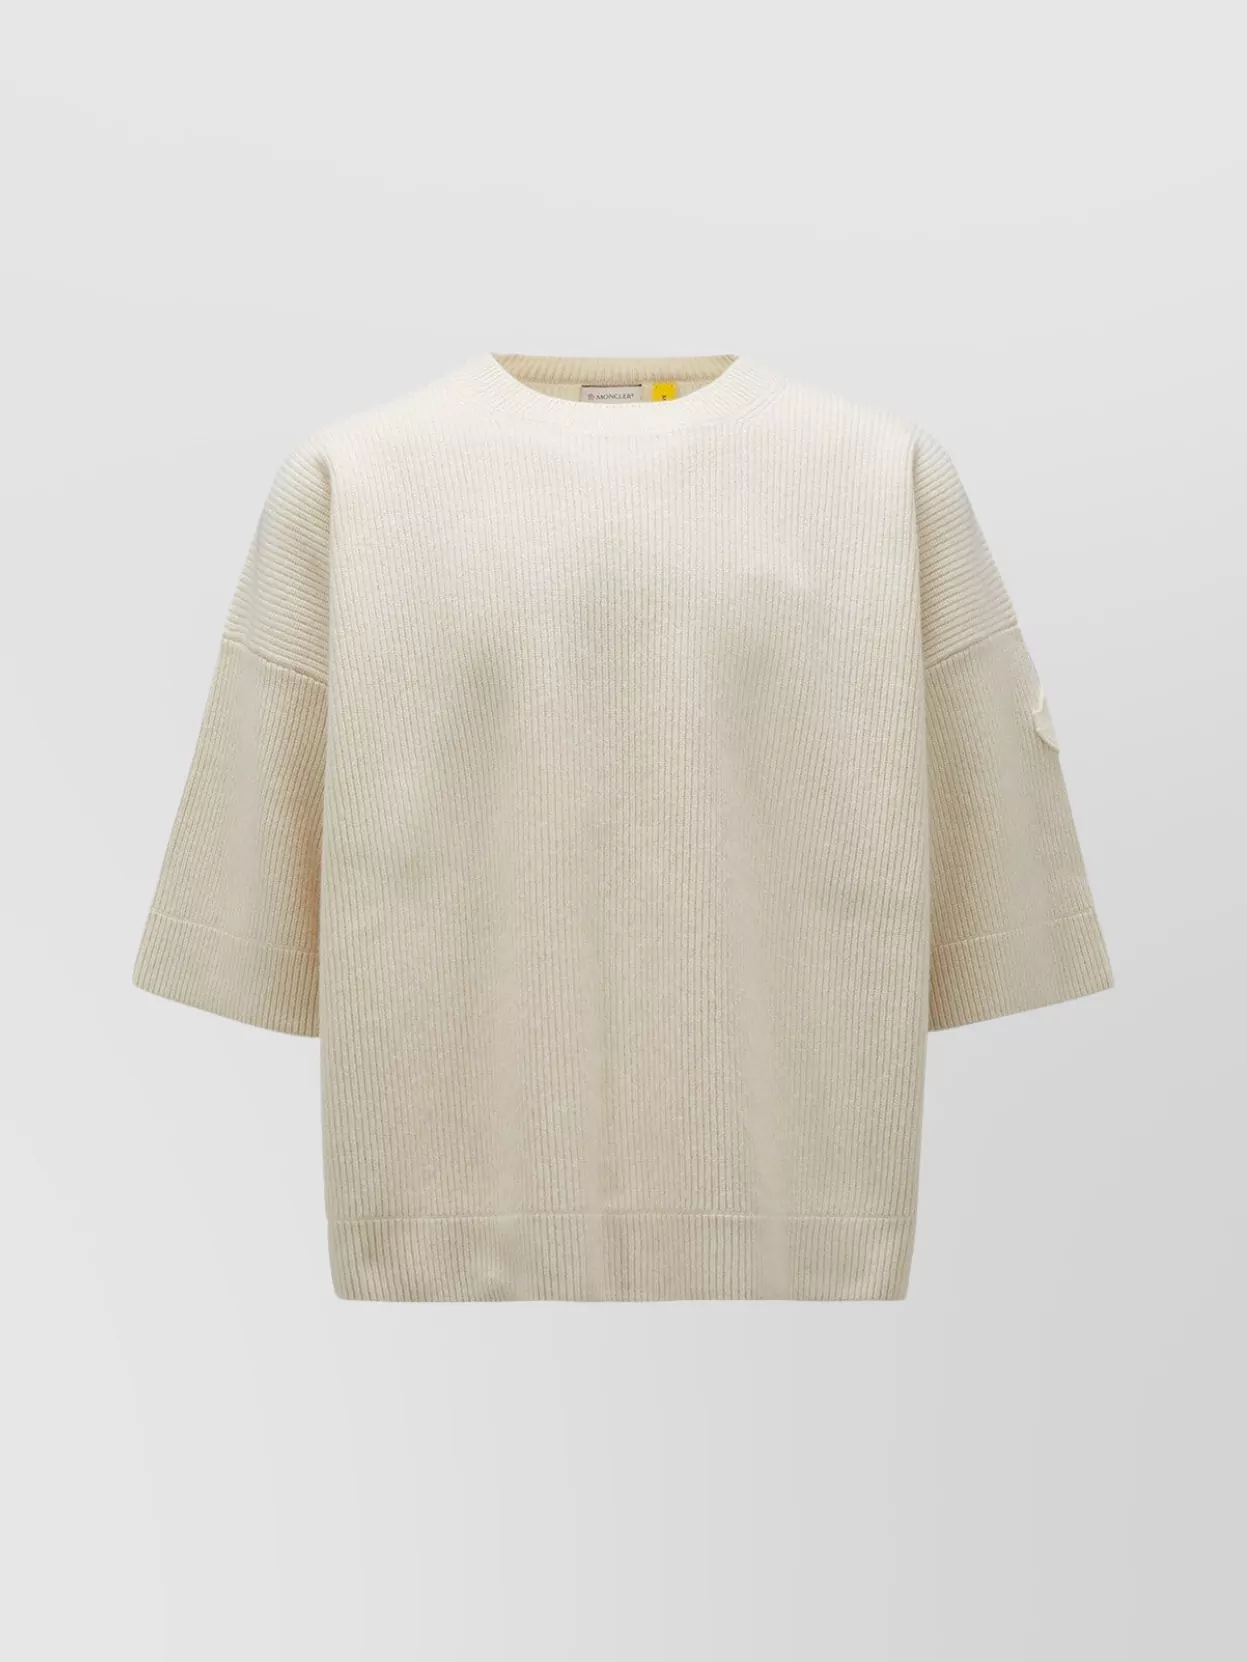 Shop Moncler Genius Roc Nation Collaboration Wool Knit In Cream